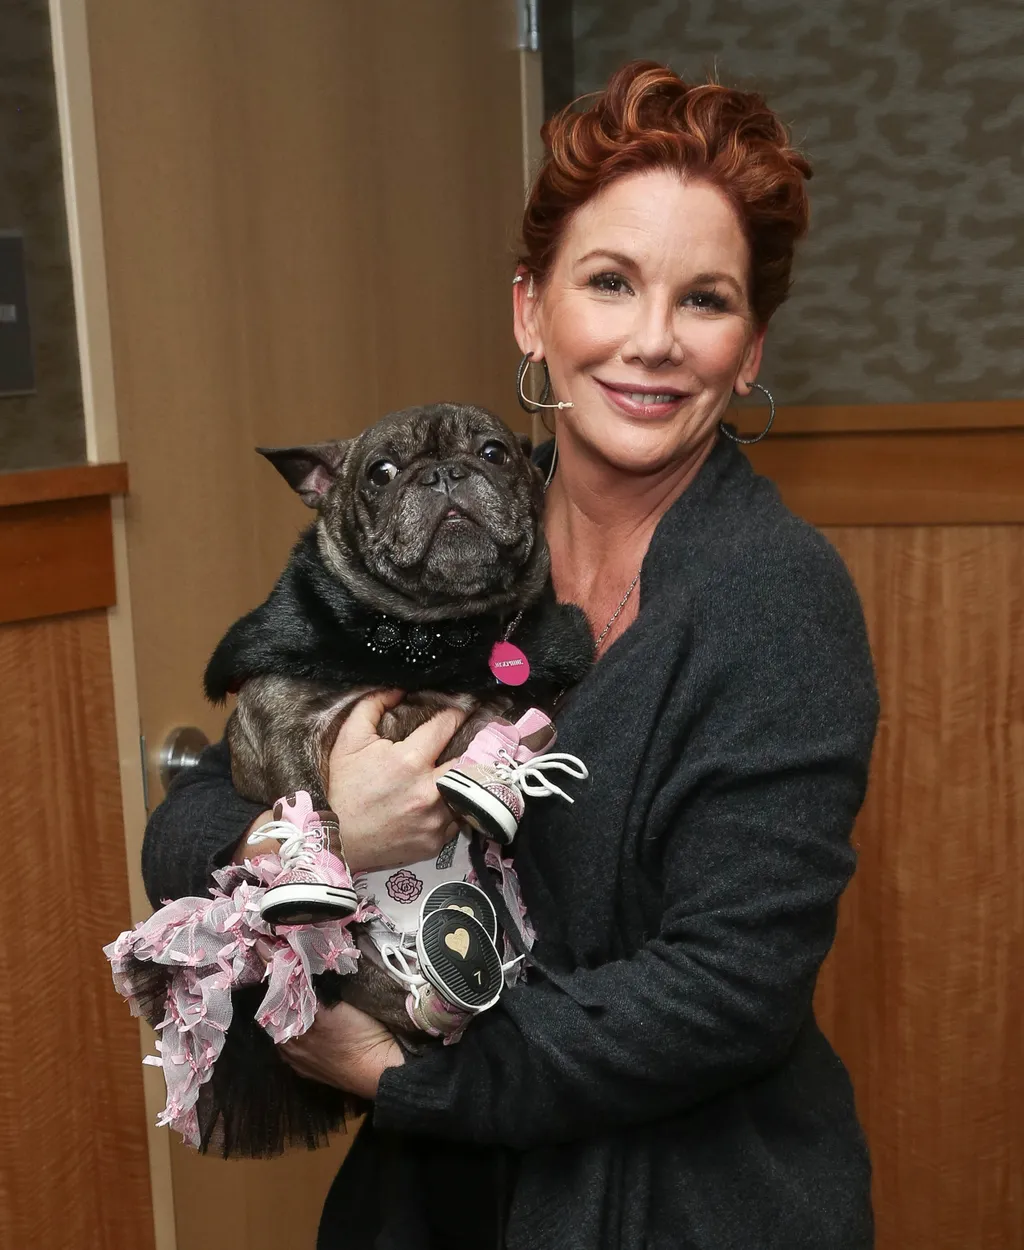 Melissa Gilbert Signs Copies Of Her Children's Book "Daisy And Josephine" GettyImageRank2 Lexington People VERTICAL USA New York City One Person ADULT LITERATURE VISIT One Woman Only Adults Only Melissa Gilbert Arts Culture and Entertainment Celebrities B